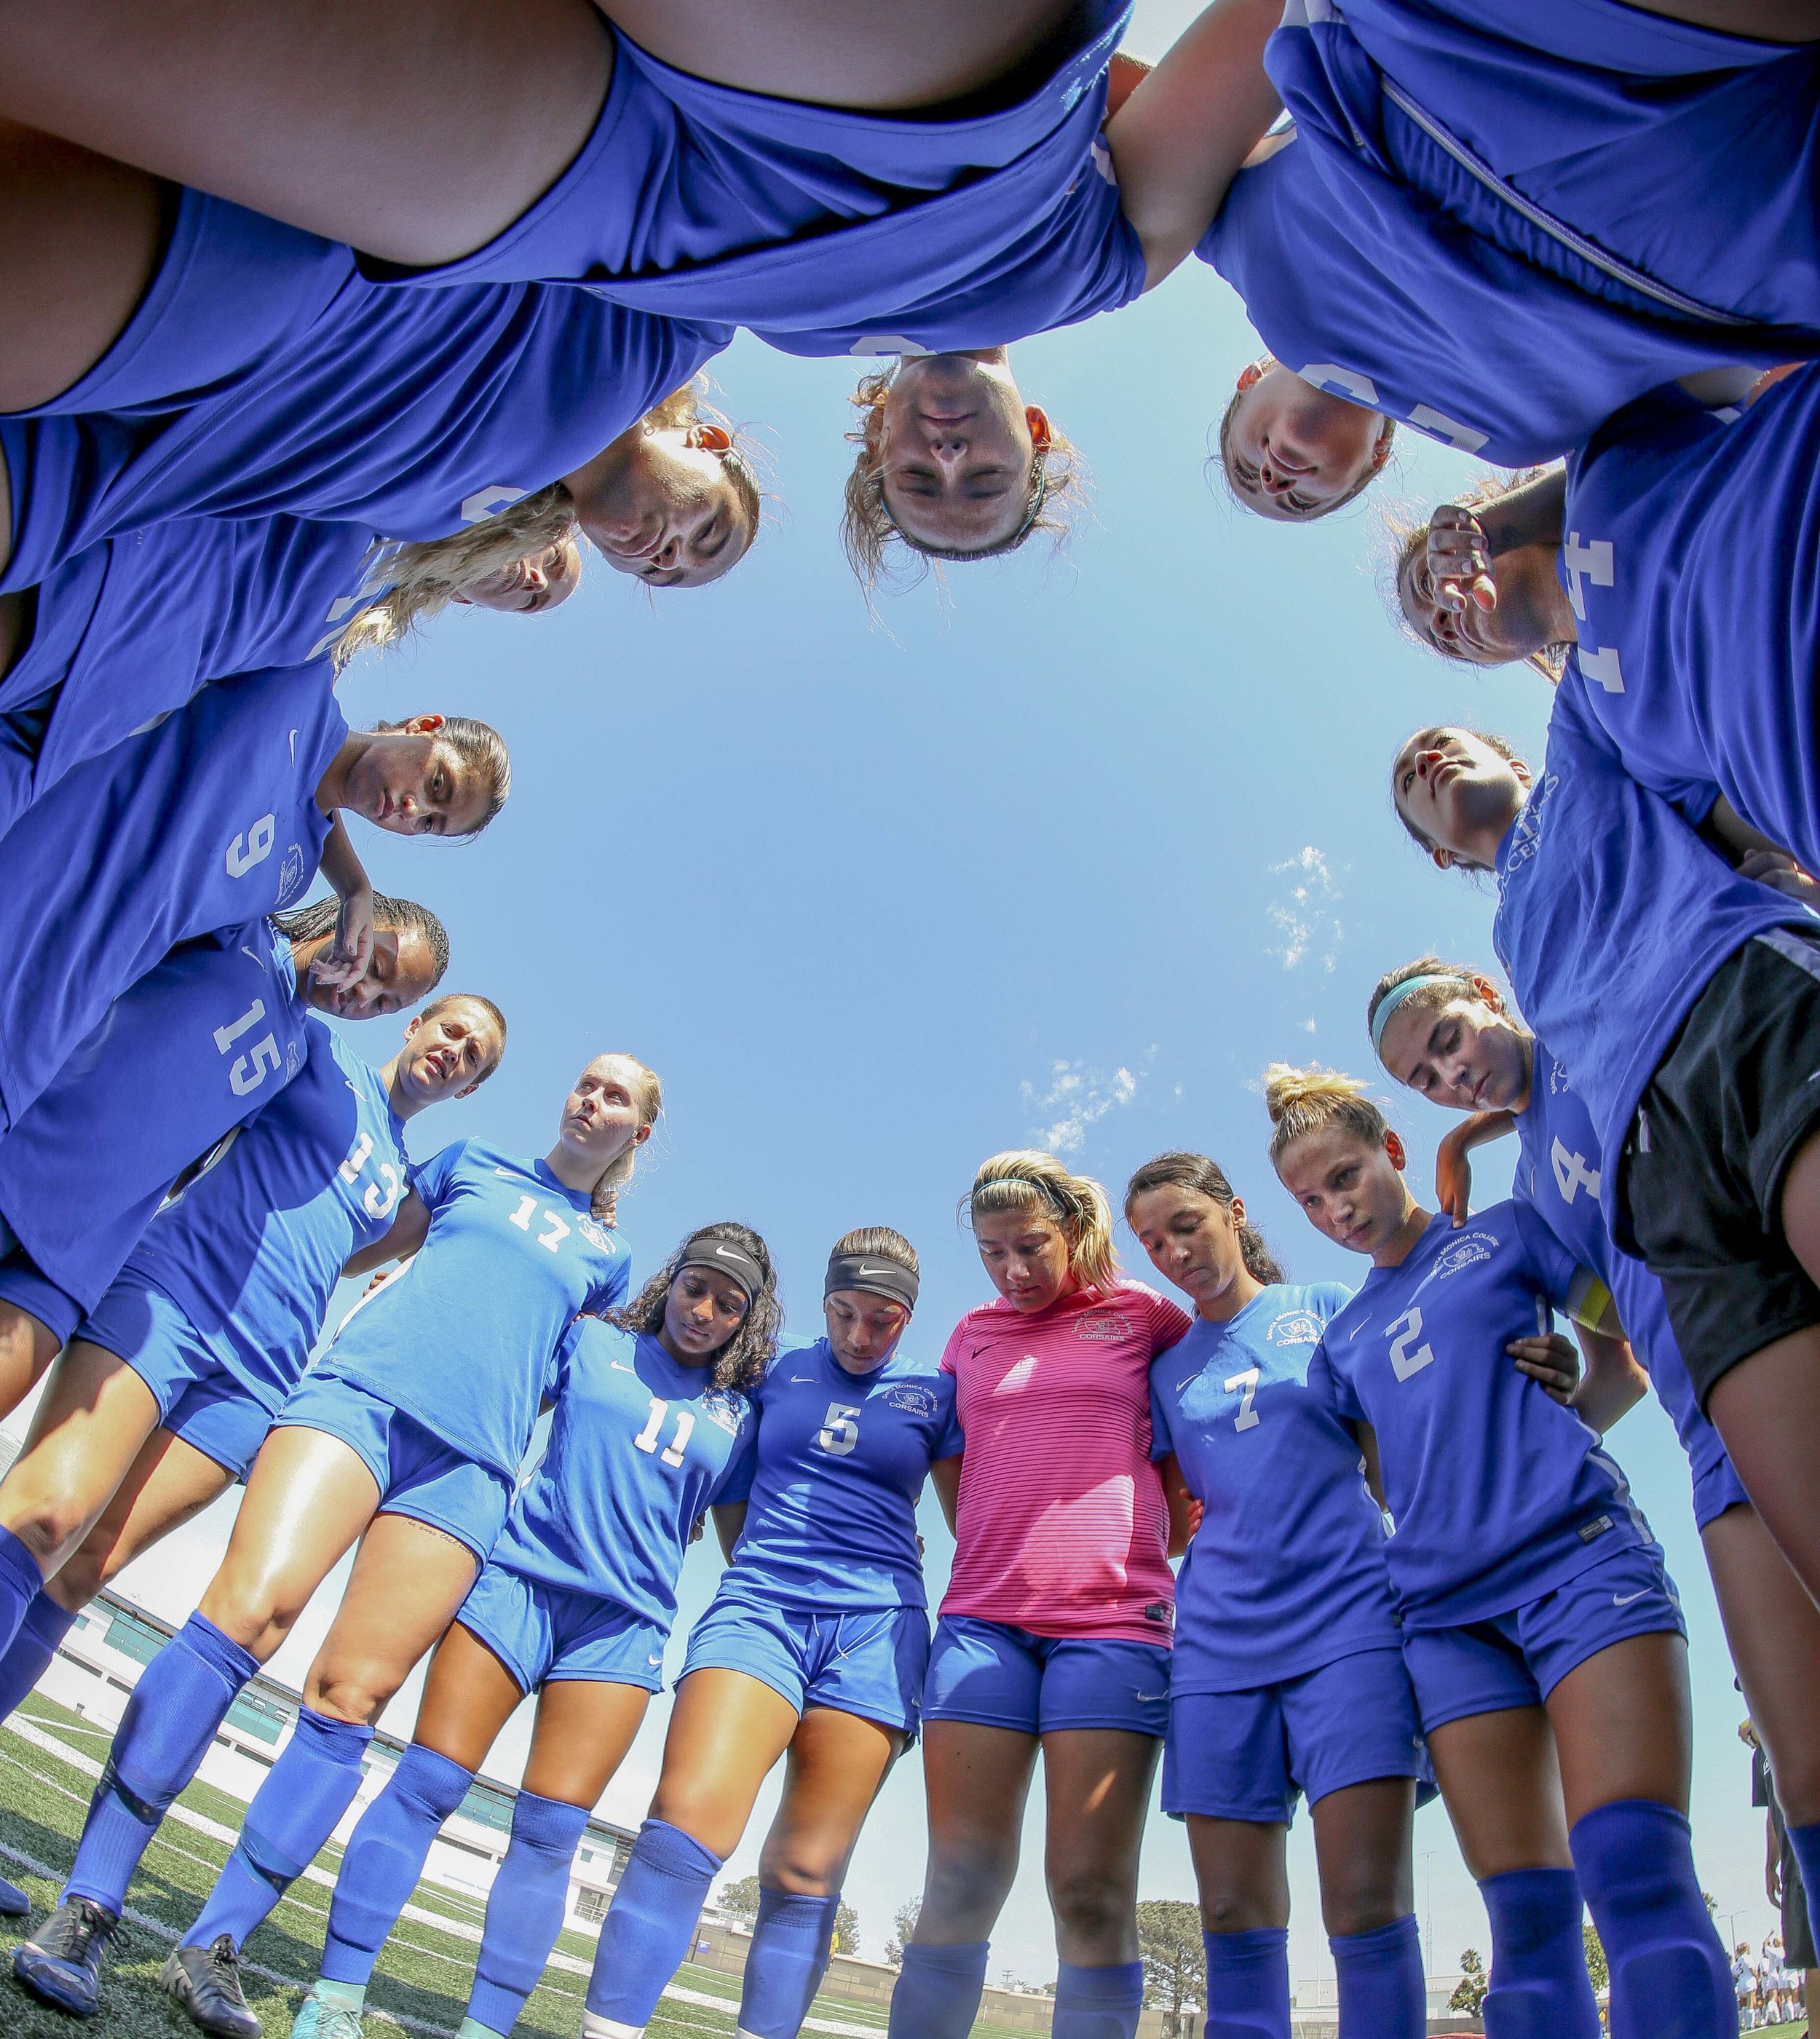  The Santa Monica College Corsairs Womens Soccer Team form a huddle before they play against The El Camino College Warriors, Friday, September 1st, 2017, at the Sana Monica College Main Campus field in Santa Monica, CA. The Corsairs beat The Warriors